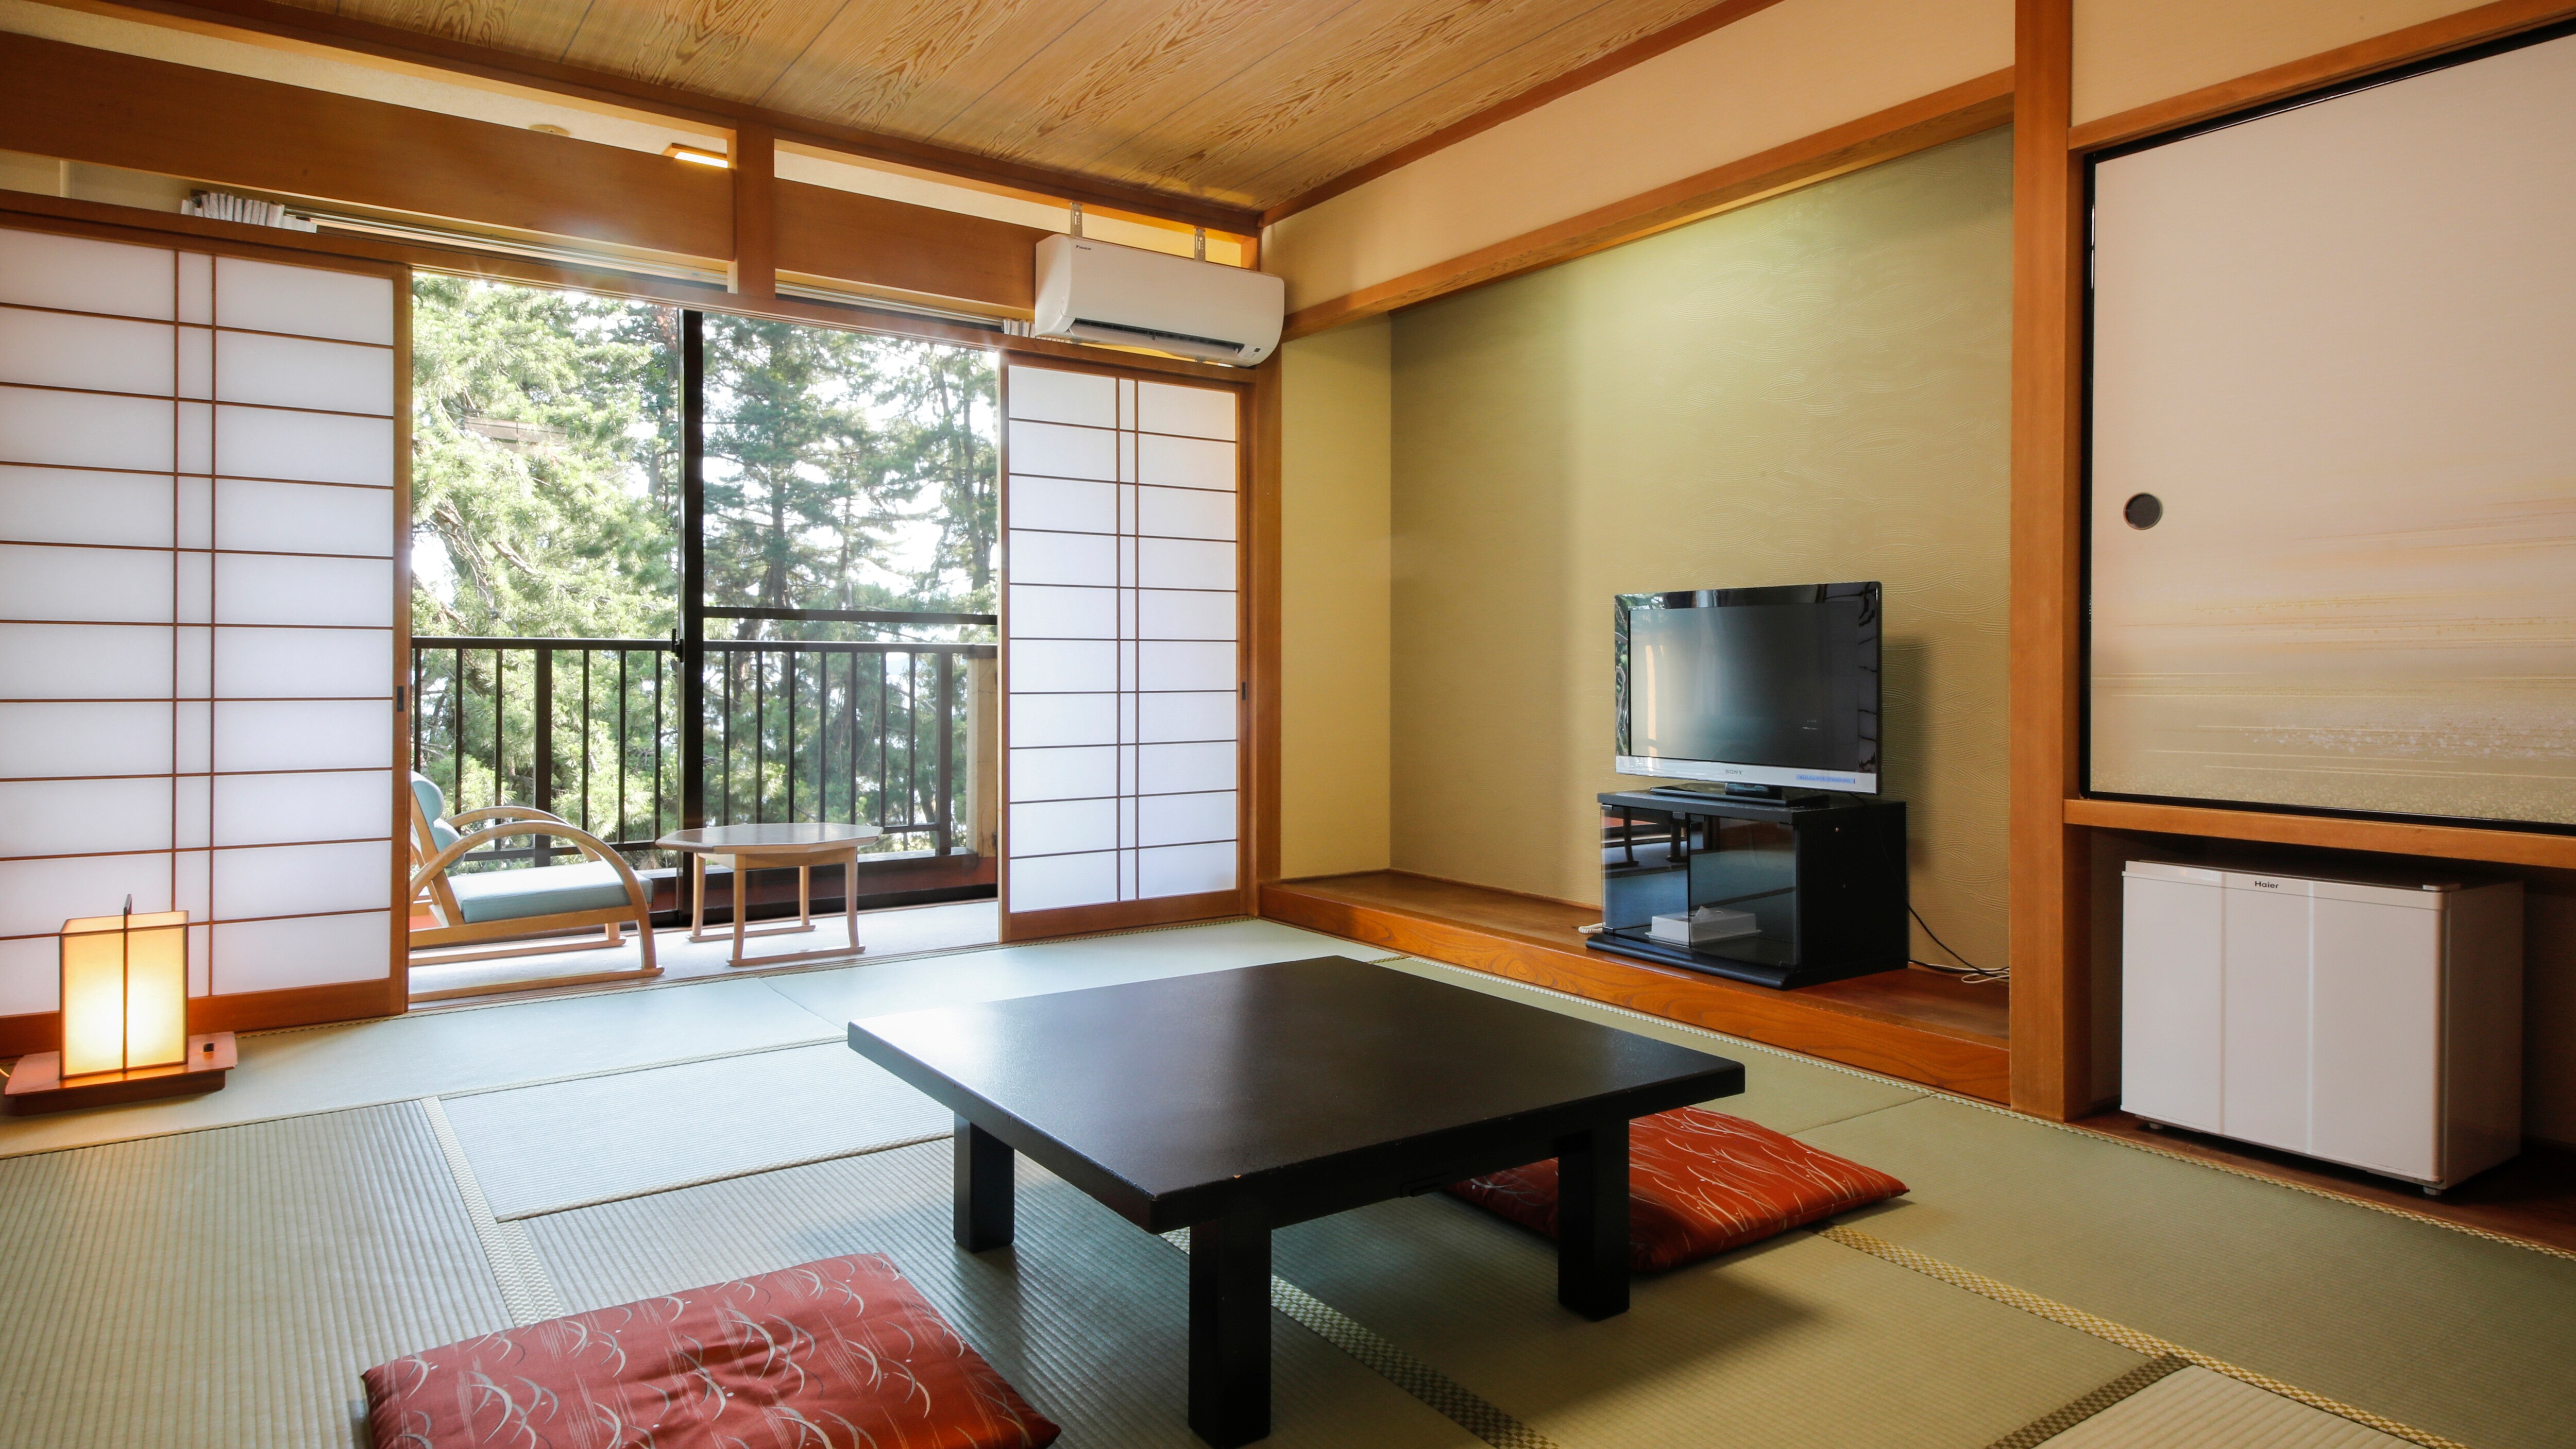 Main building guest room Japanese-style room 12 tatami mats